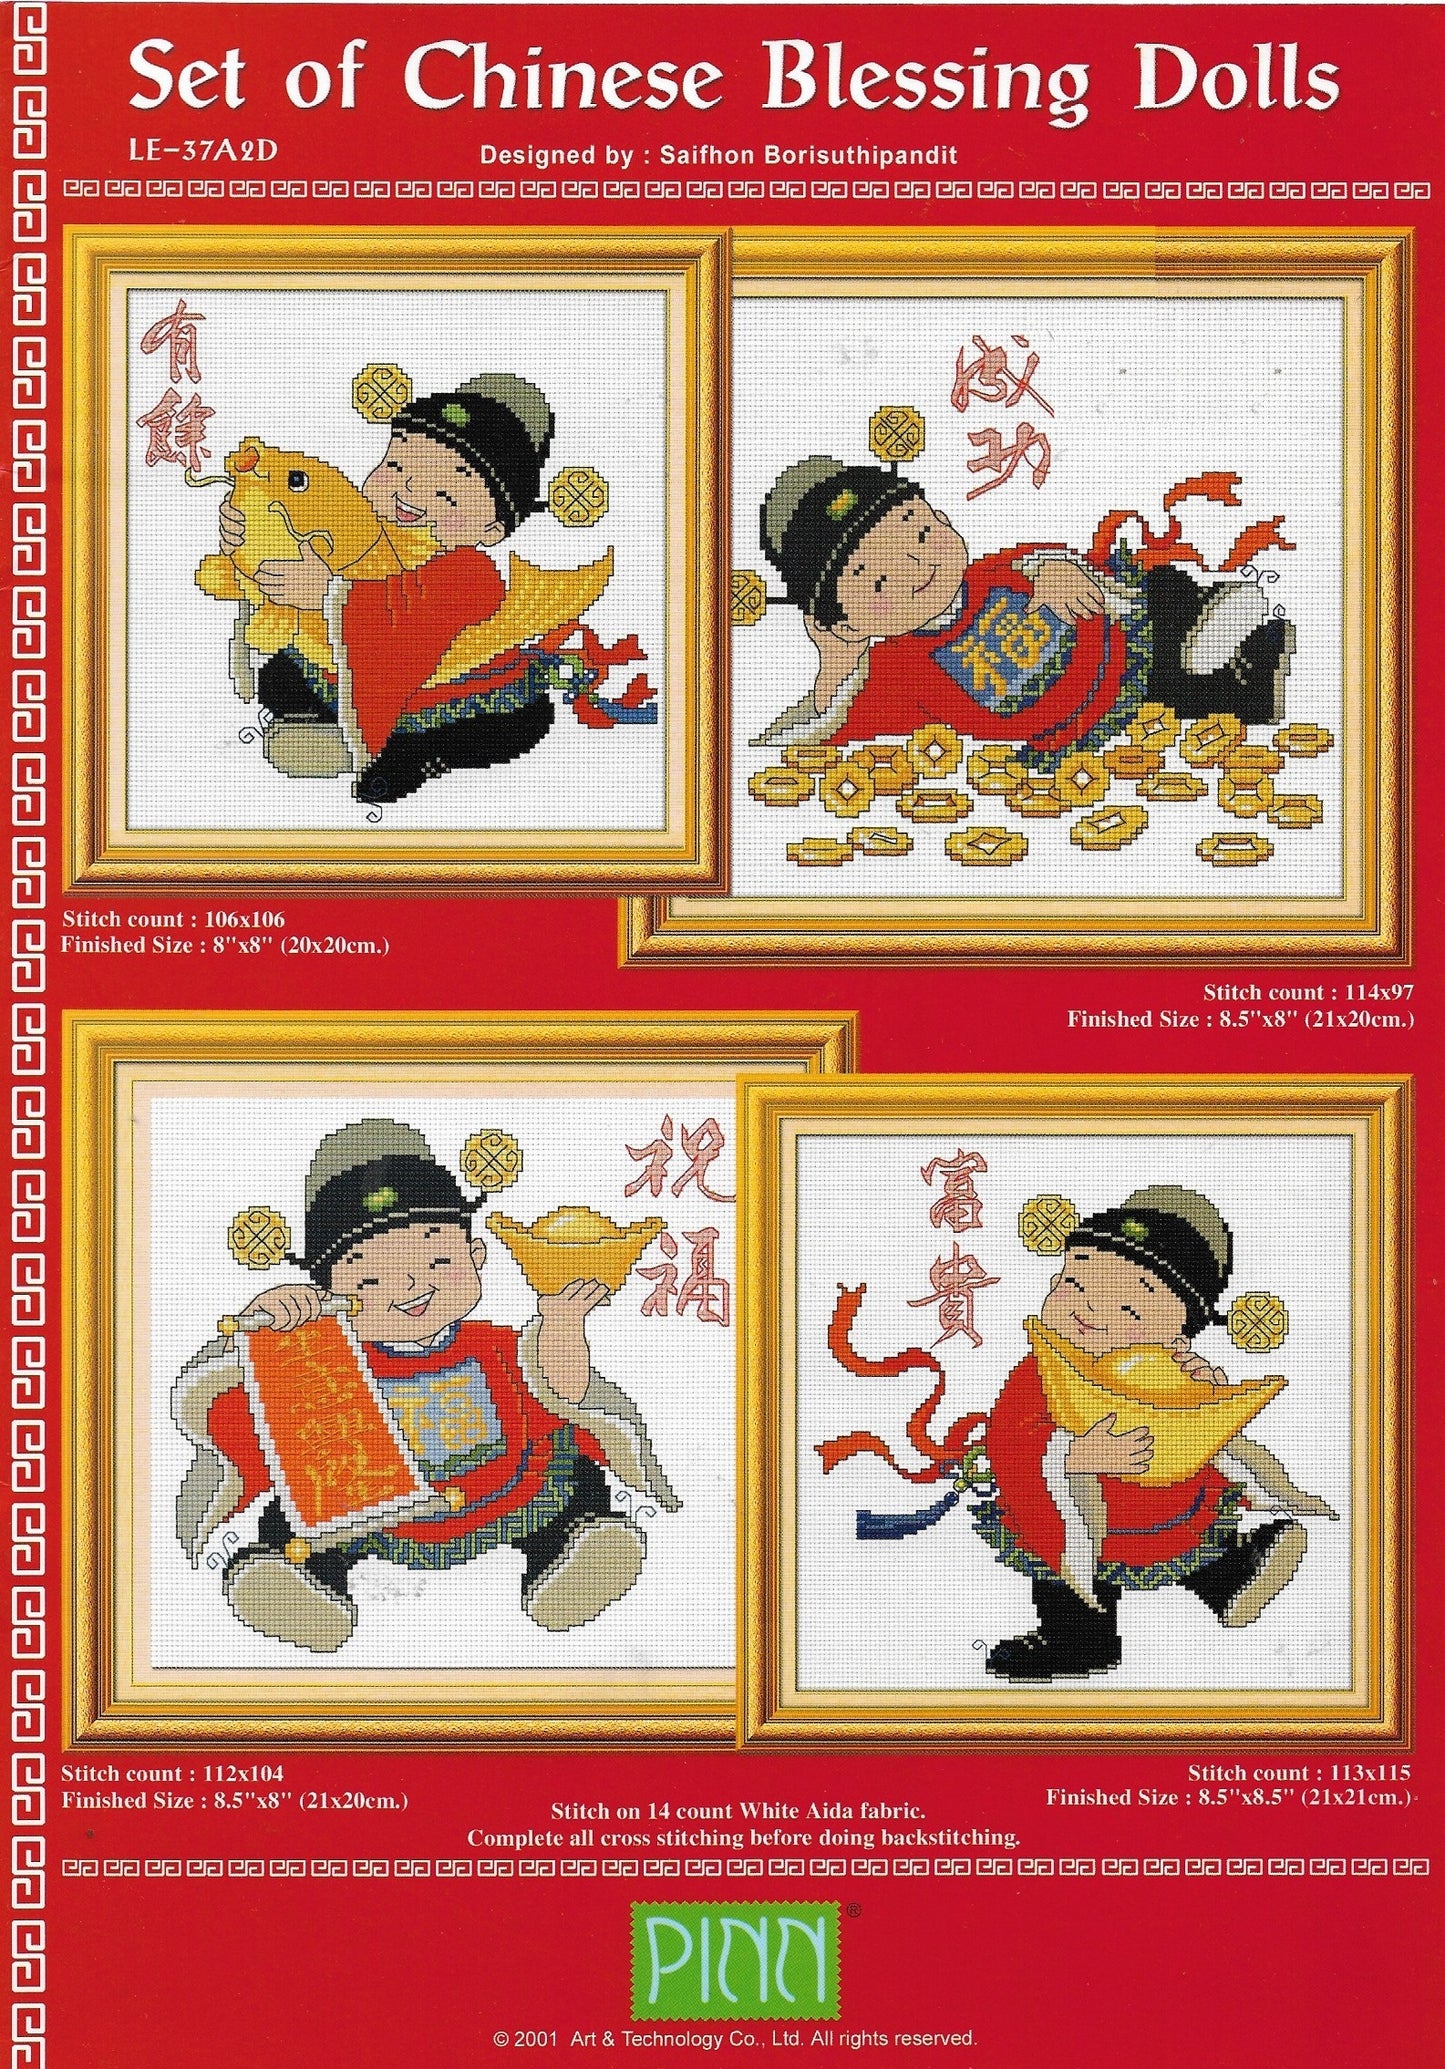 Set of Chinese Blessing Dolls pattern